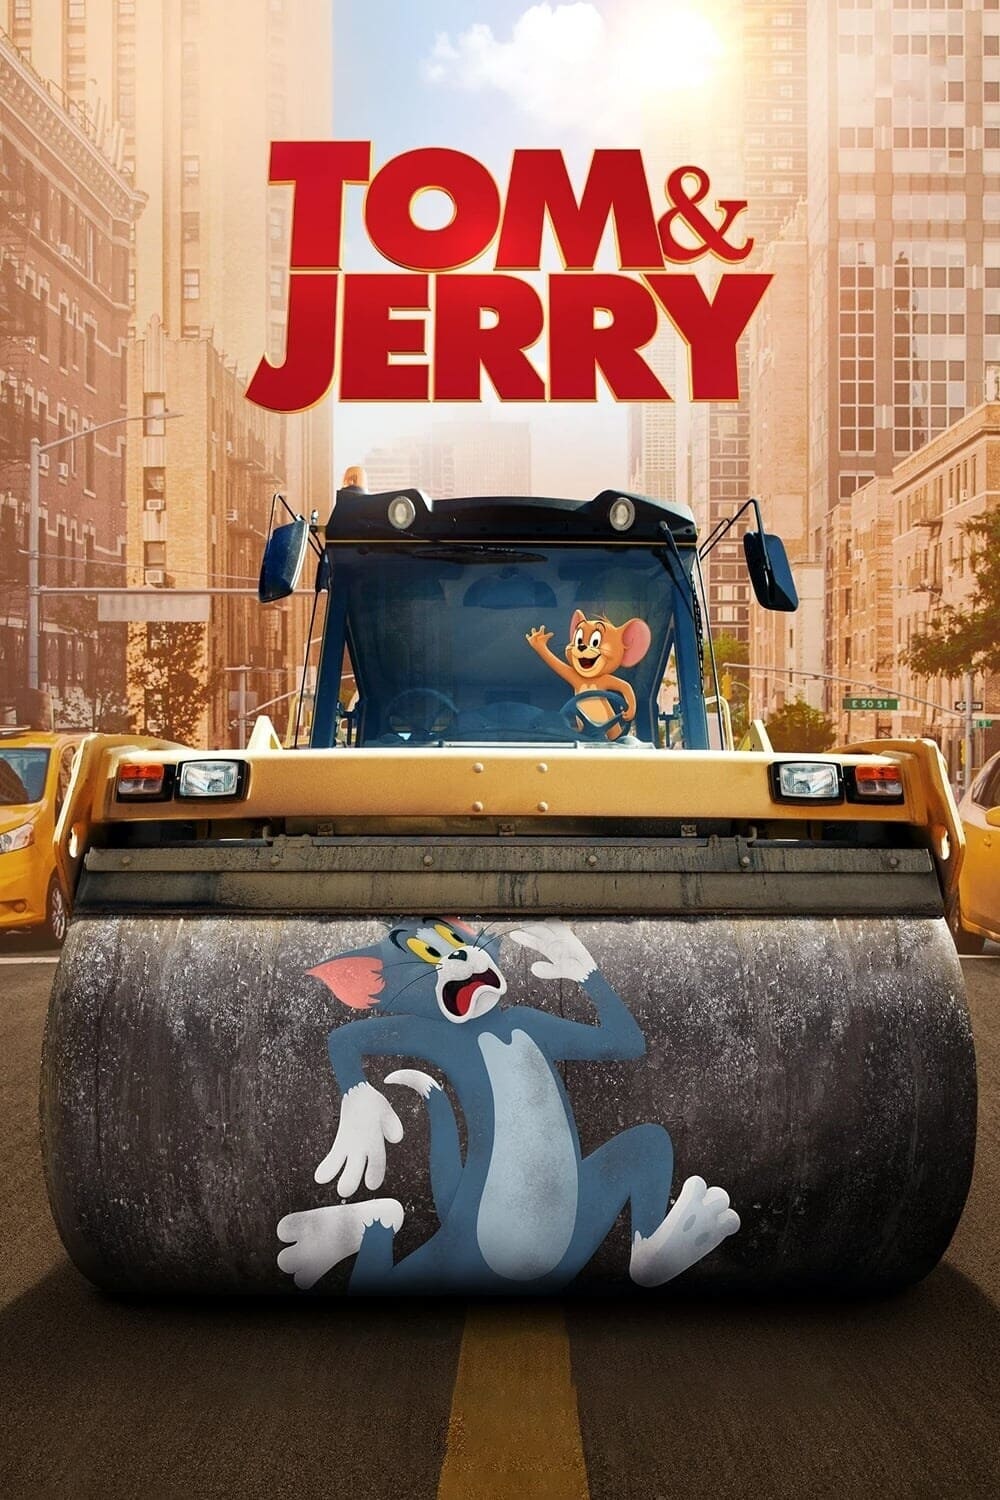 Tom y Jerry (2021) PLACEBO Full HD 1080p Latino